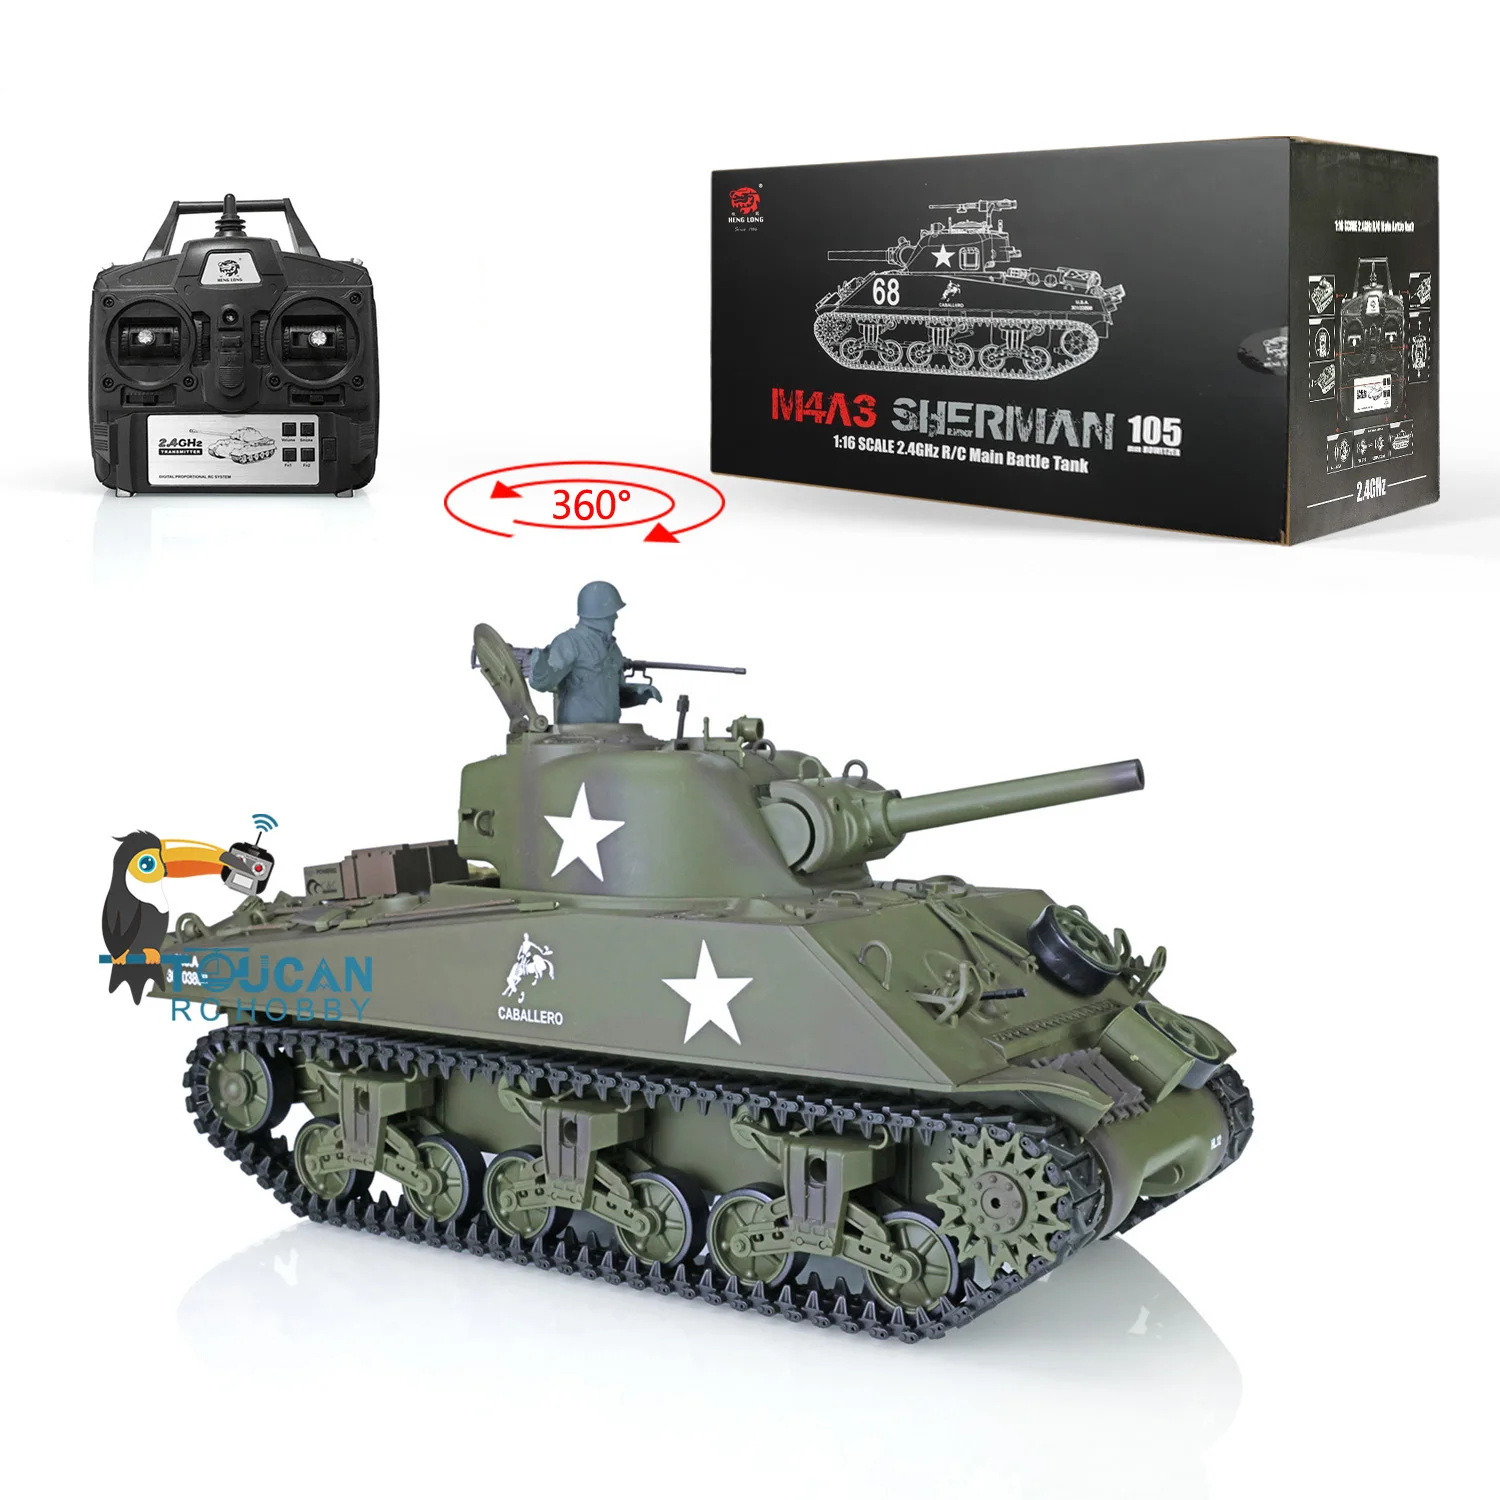 

Henglong 1/16 7.0 Plastic M4A3 Sherman 3898 360 Turret Barrel Recoil RC Tank Smoke Effect Armored Adult Toy TH17669-SMT7